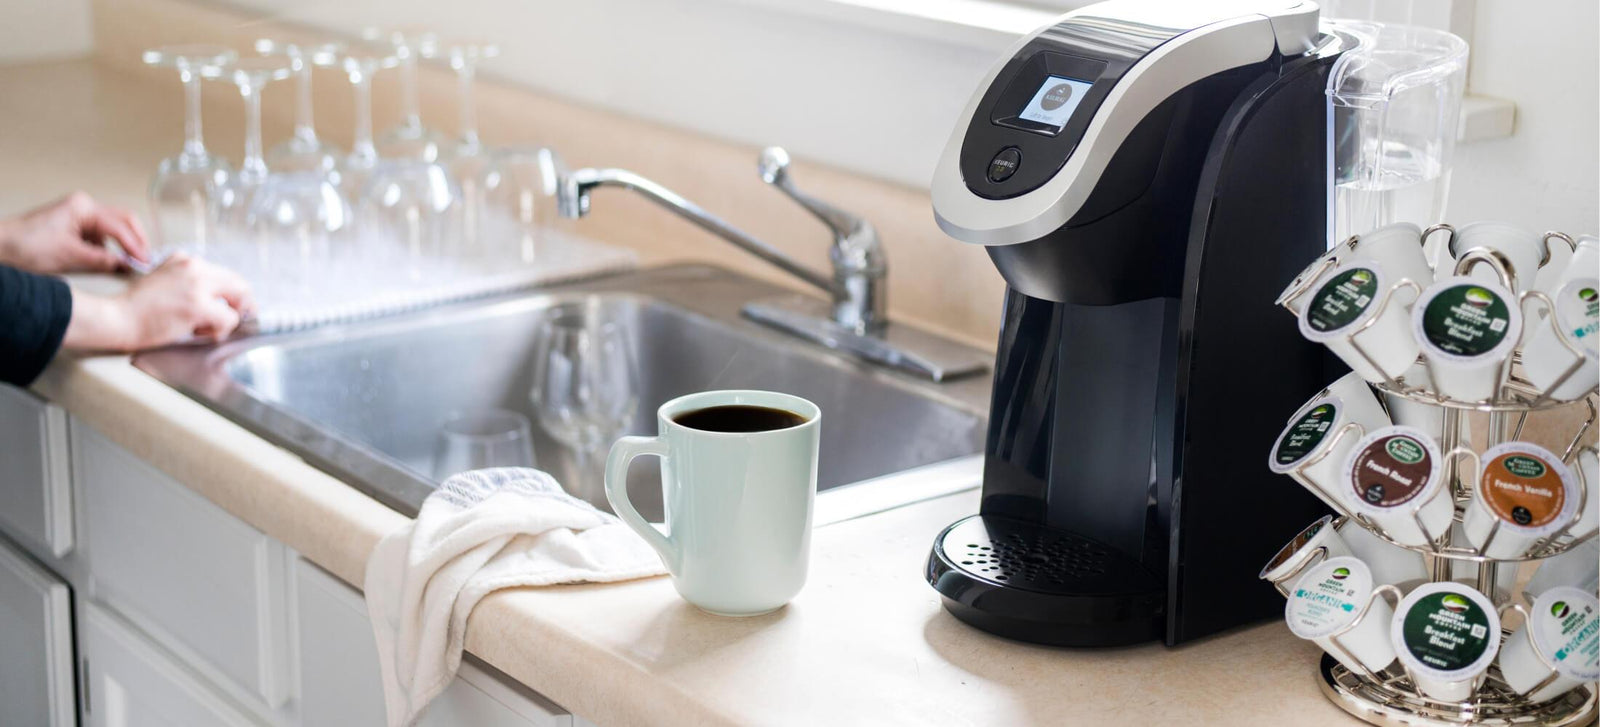 Keurig Troubleshooting: 5 Simple Solutions to Common Problems